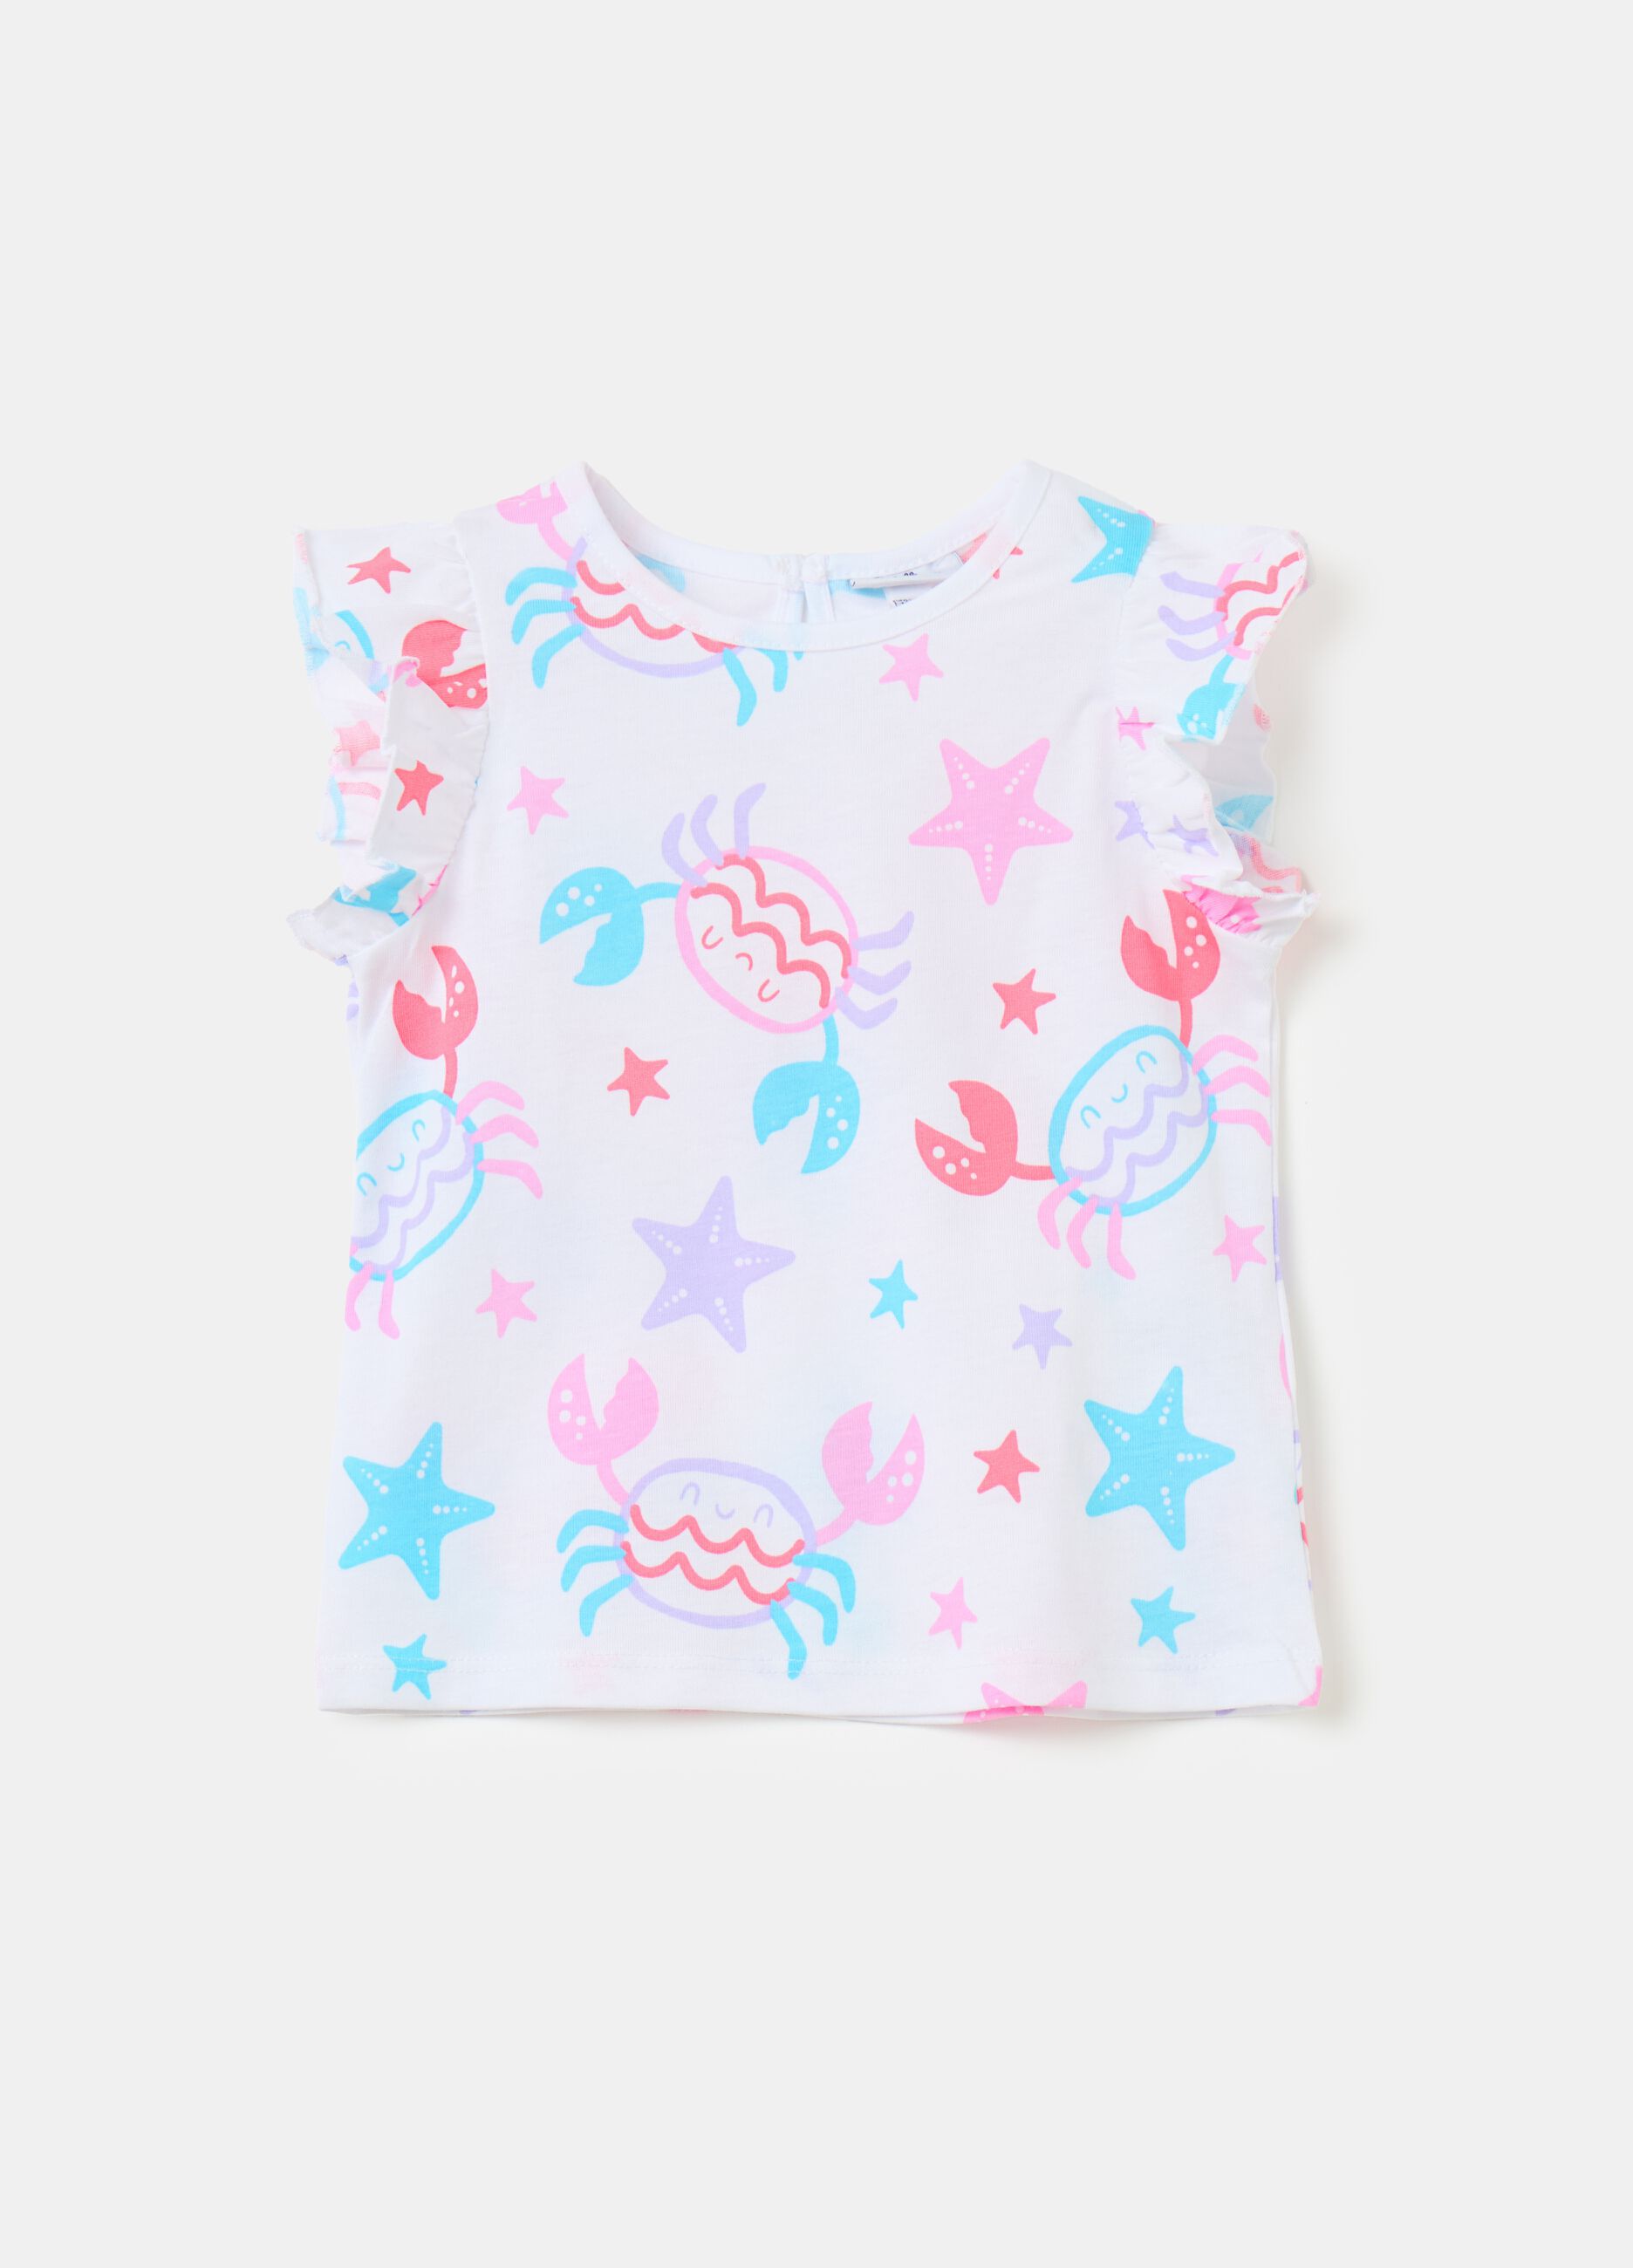 100% cotton tank top with print